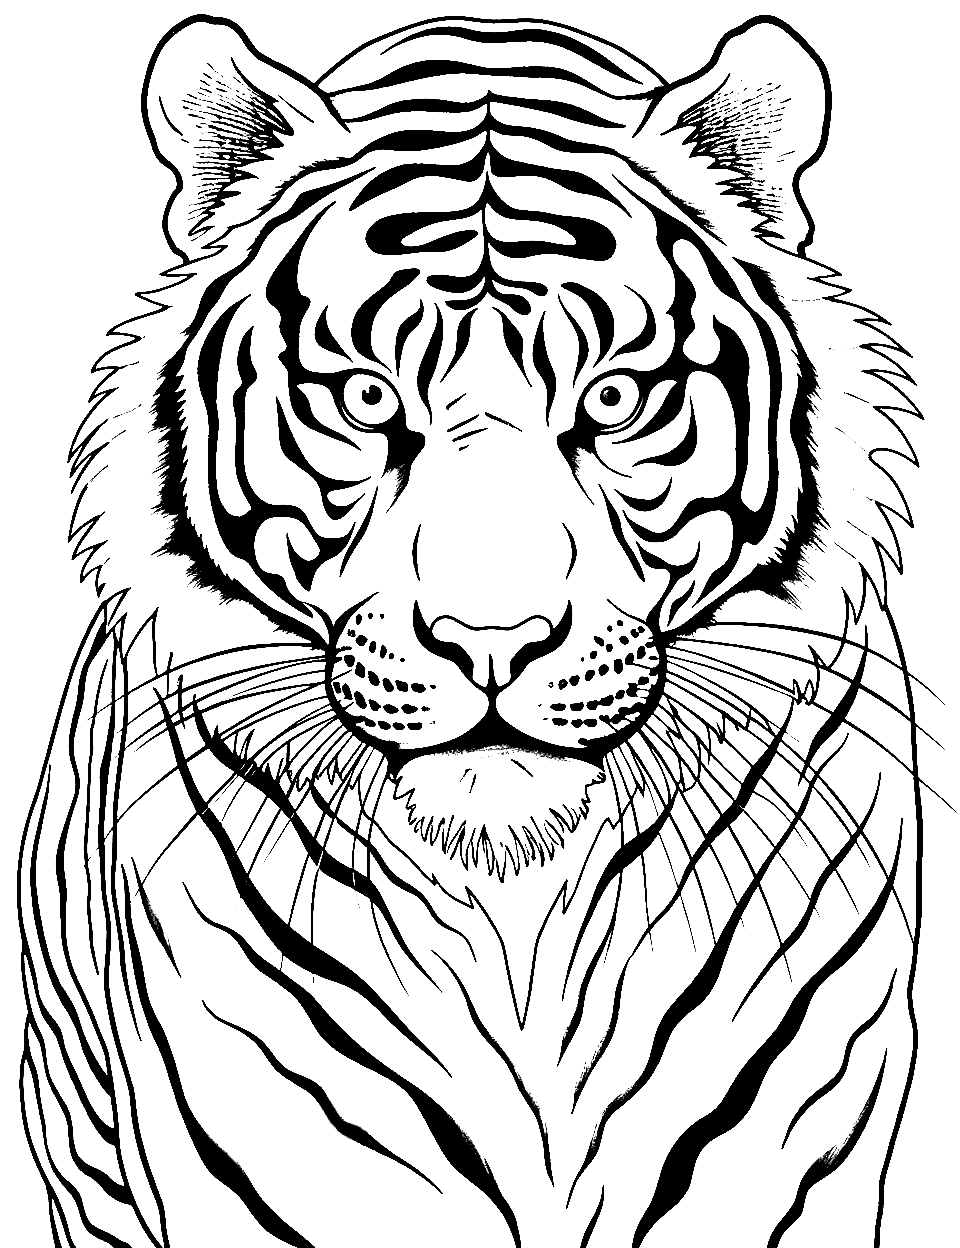 Whisker Wonders Tiger Coloring Page - A close-up focusing on the long whiskers of a tiger.